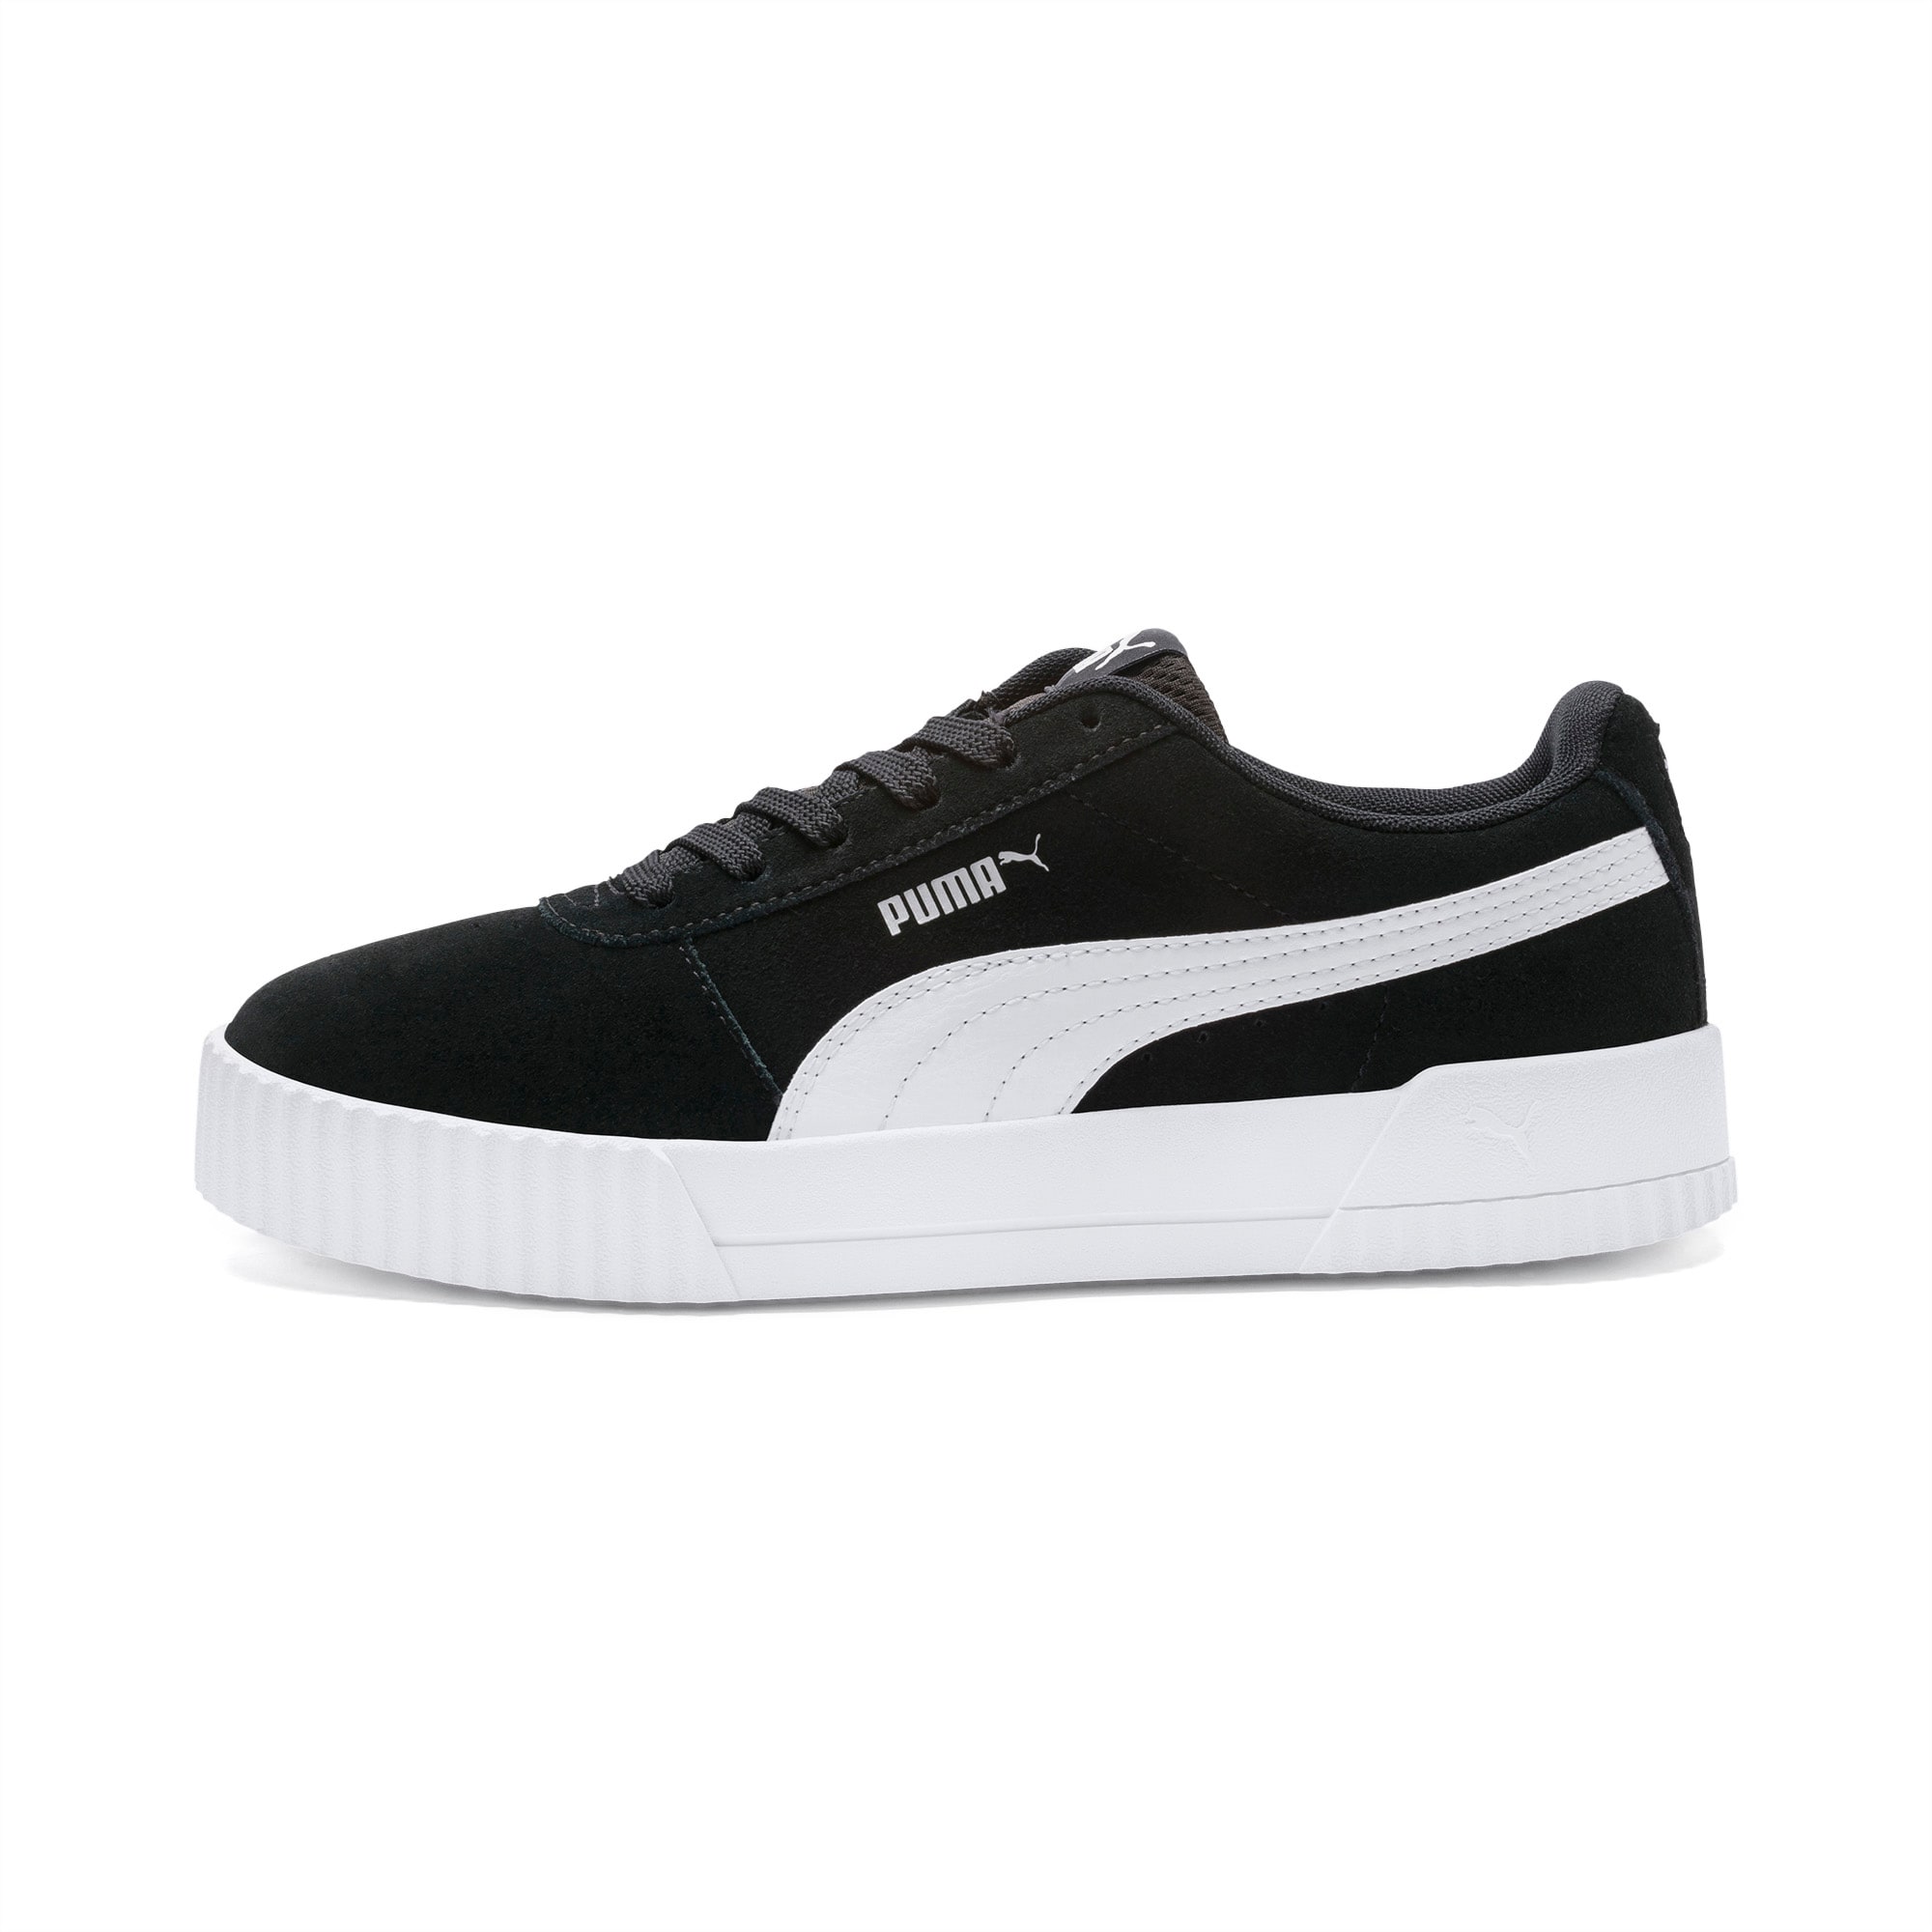 puma black and silver shoes